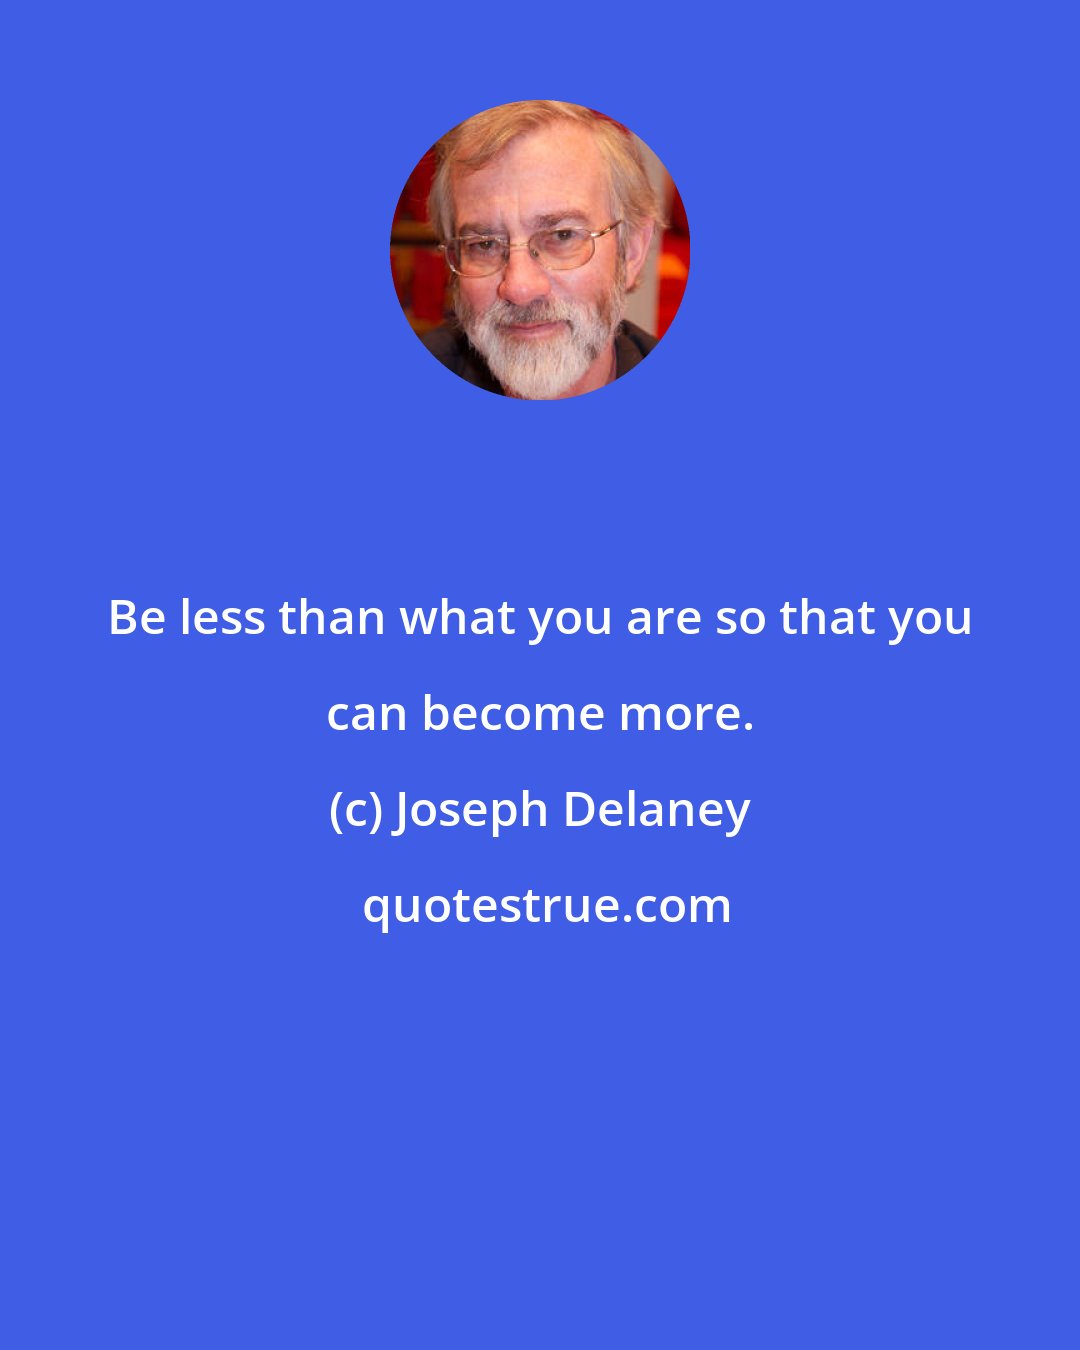 Joseph Delaney: Be less than what you are so that you can become more.